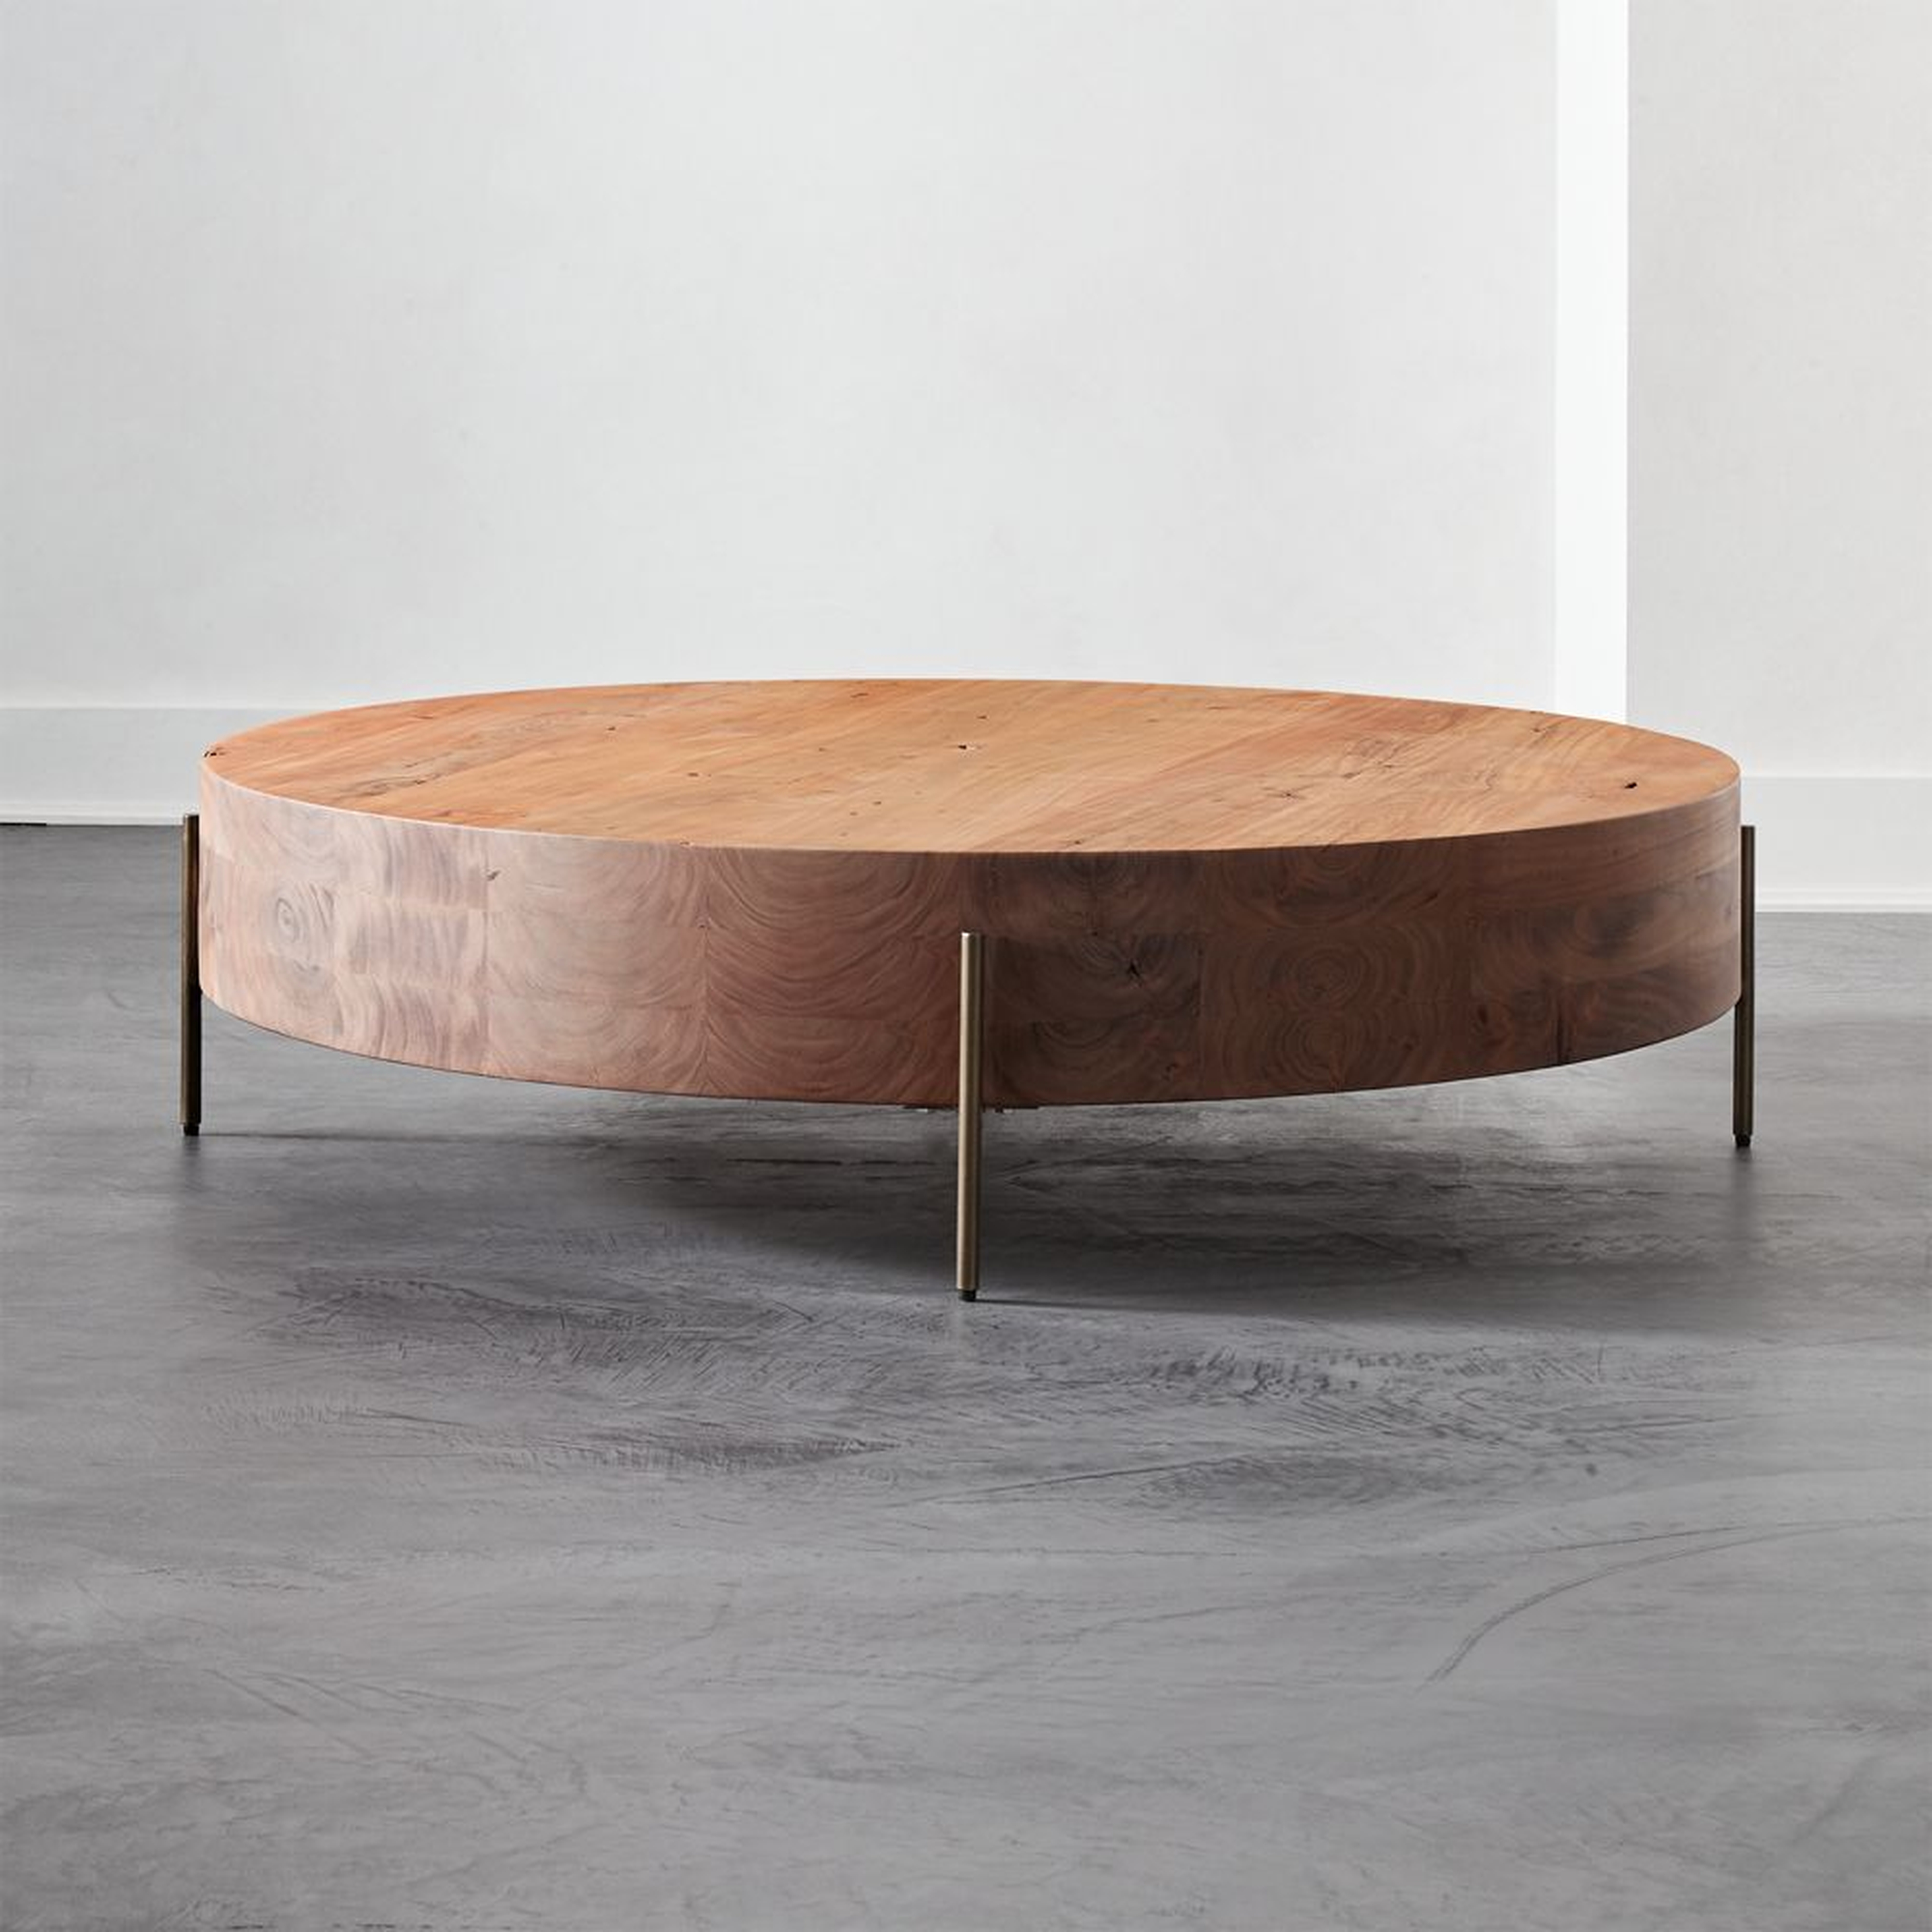 Proctor Low Round Wood Coffee Table - CB2